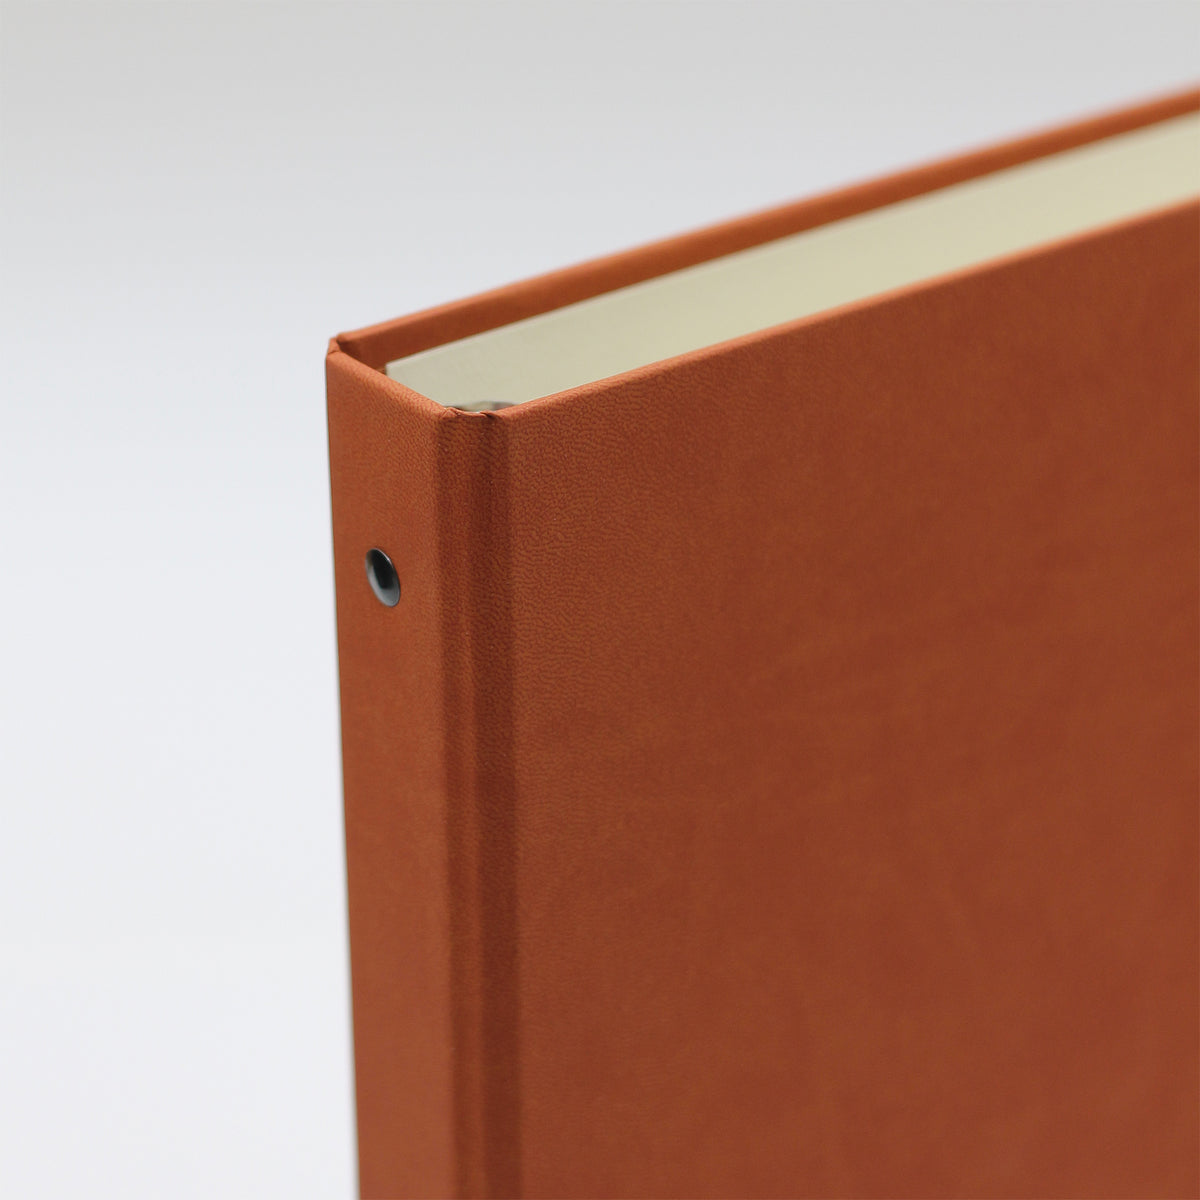 Medium Photo Binder For 4x6 Photos | Cover: Terra Cotta Vegan Leather | Available Personalized